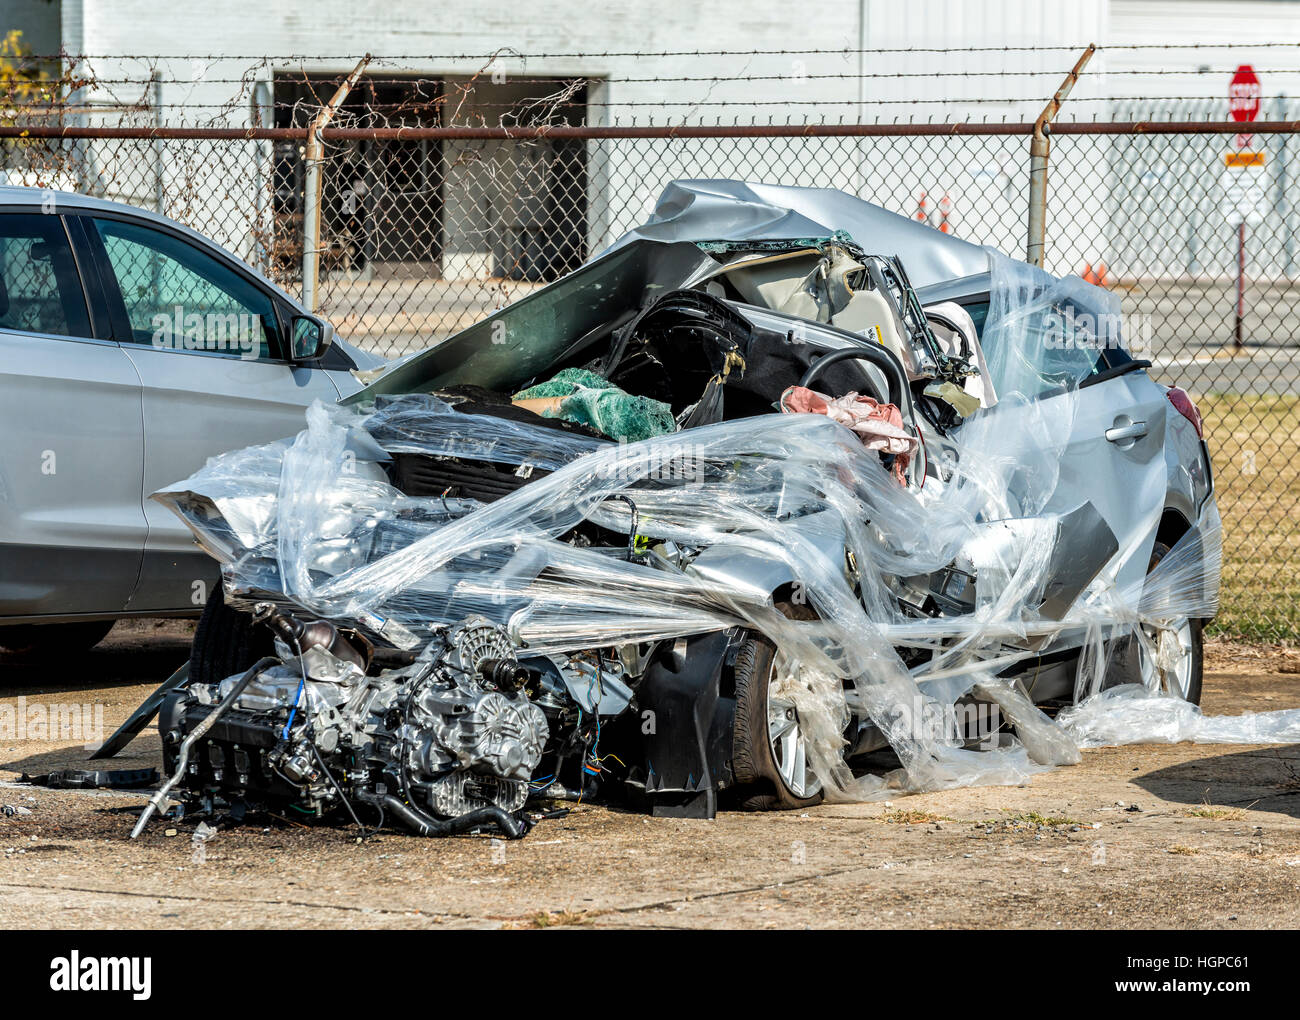 The wreckage of a completely totalled automobile.  This fatal accident was so severe that the car is beyond recognition. Stock Photo